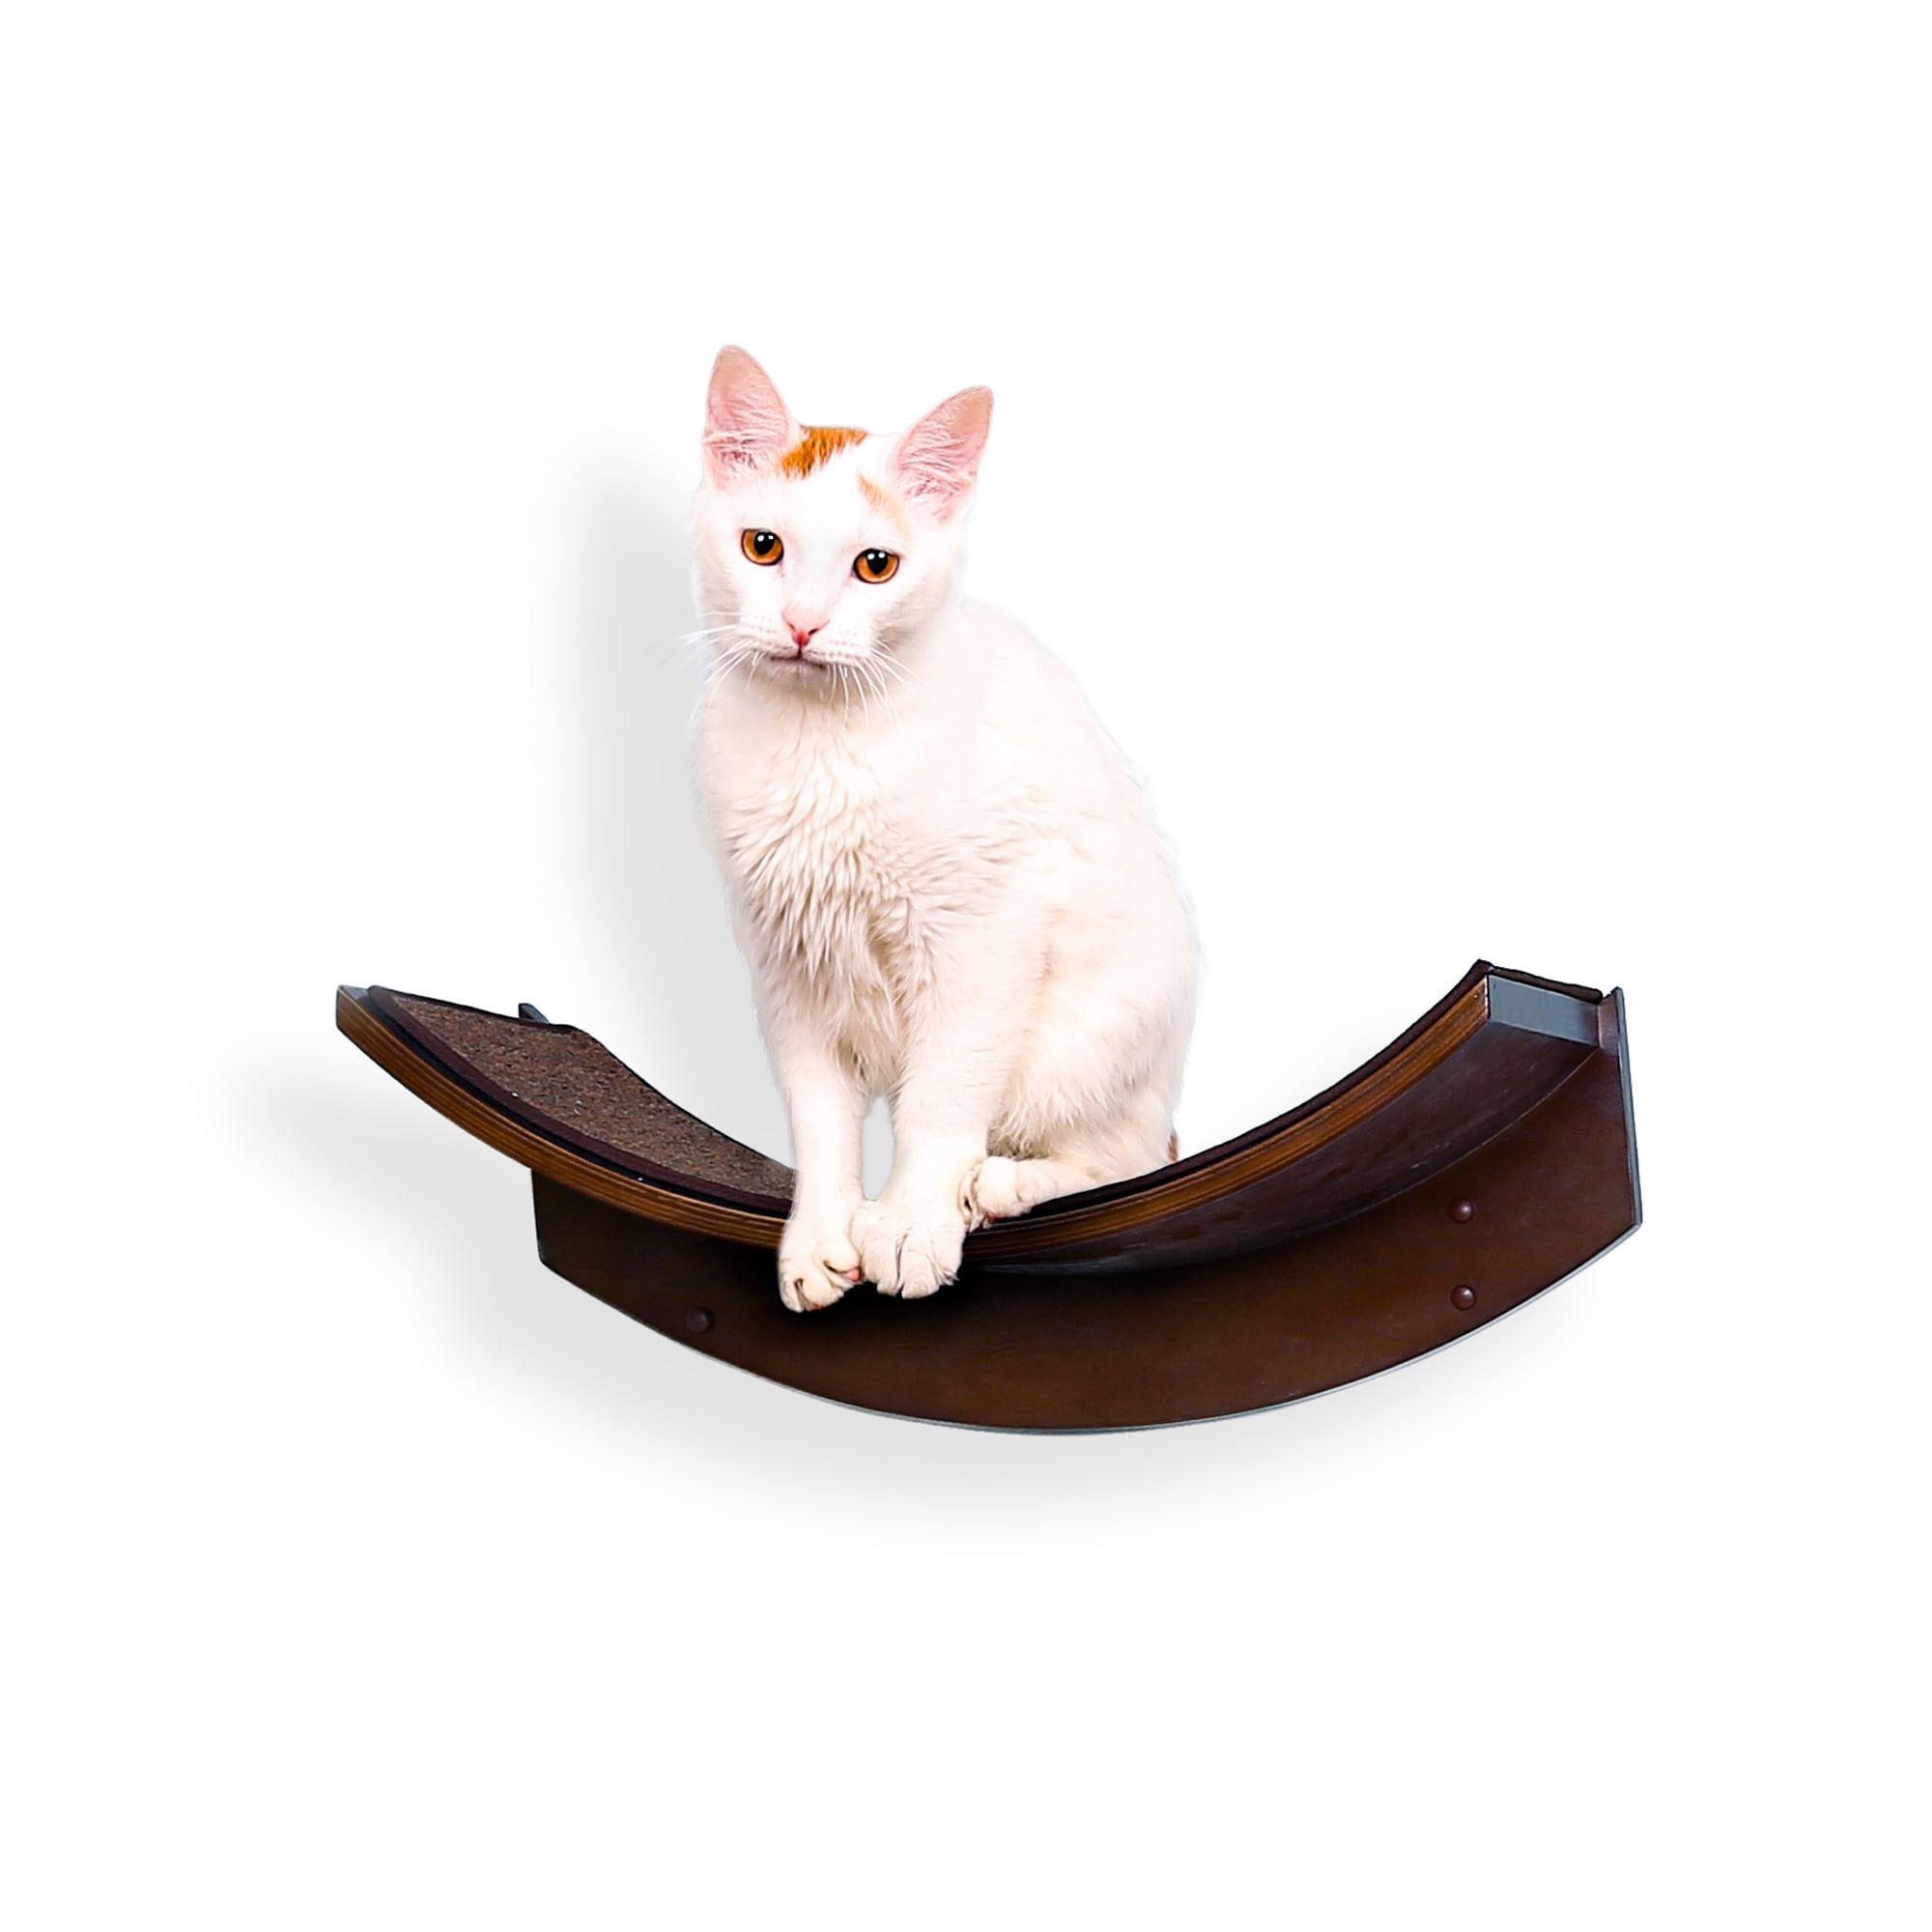 Trixie Wall Mounted Cat Lounging Set, Trixie Cat Shelves